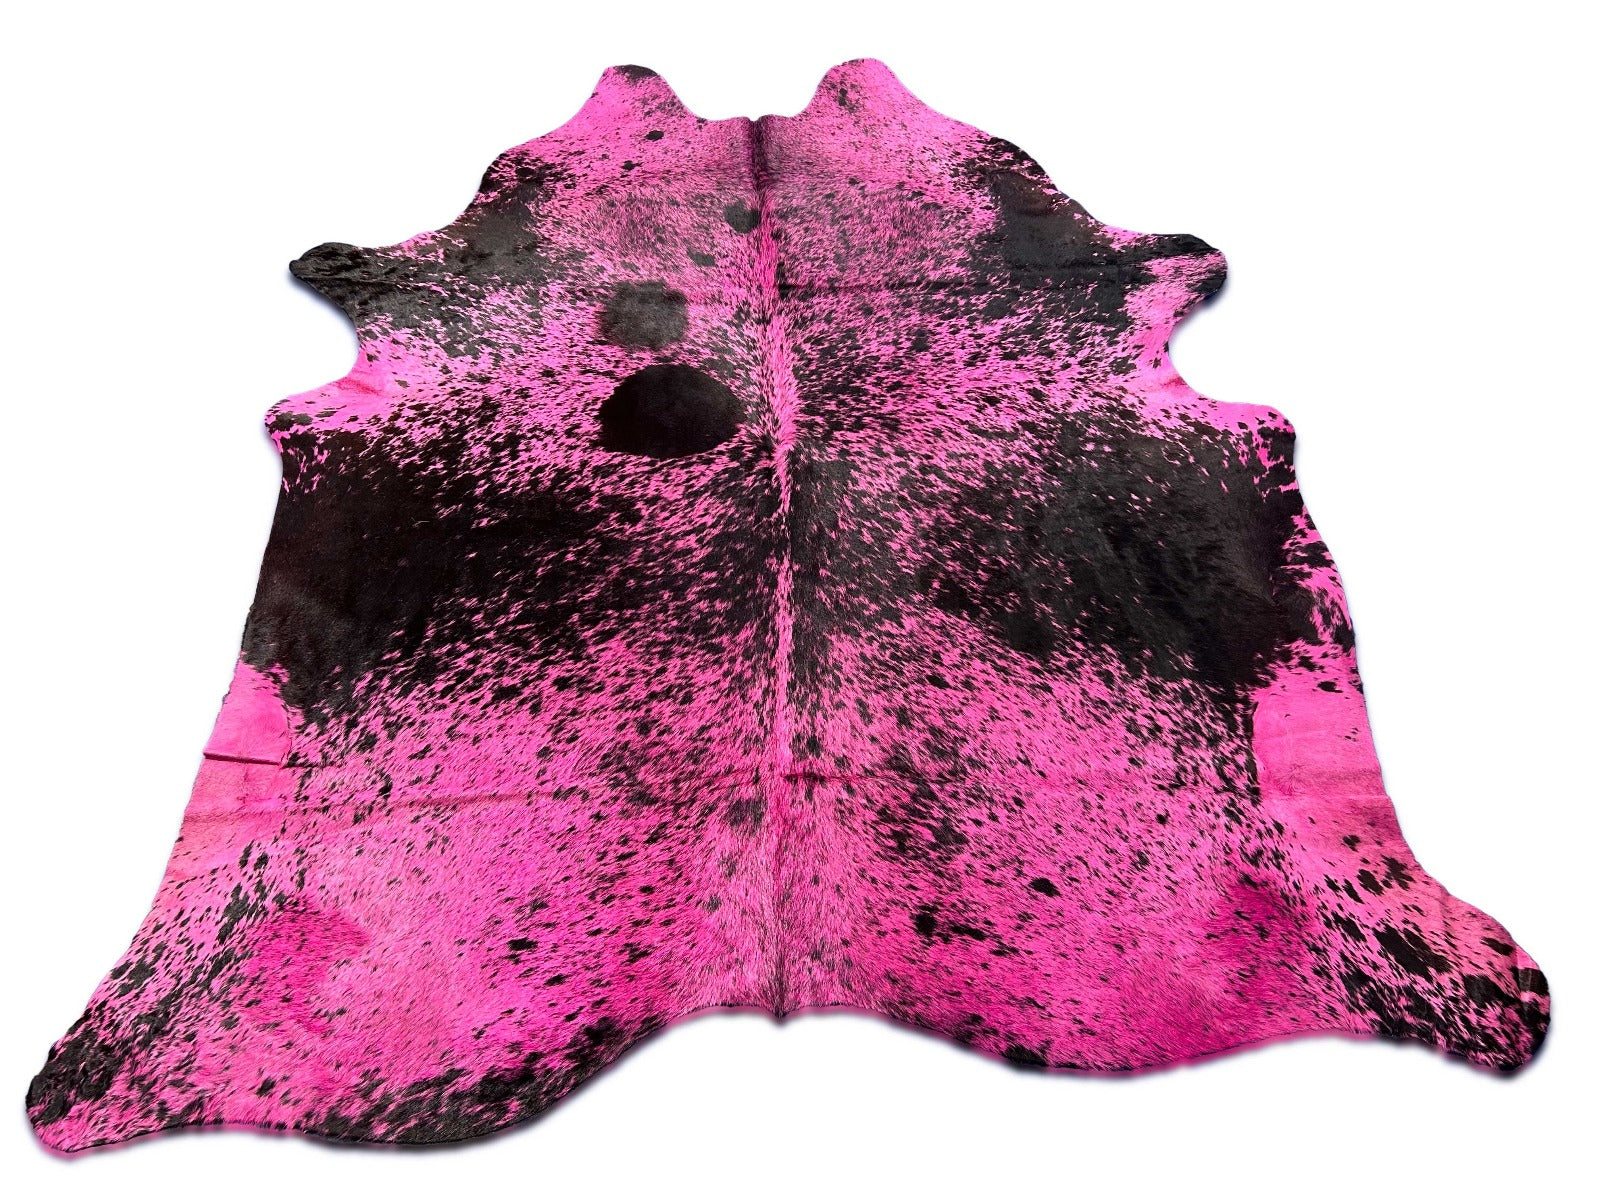 Dyed Pink Cowhide Rug (Salt & Pepper background) Size: 7.2x7 feet C-1853